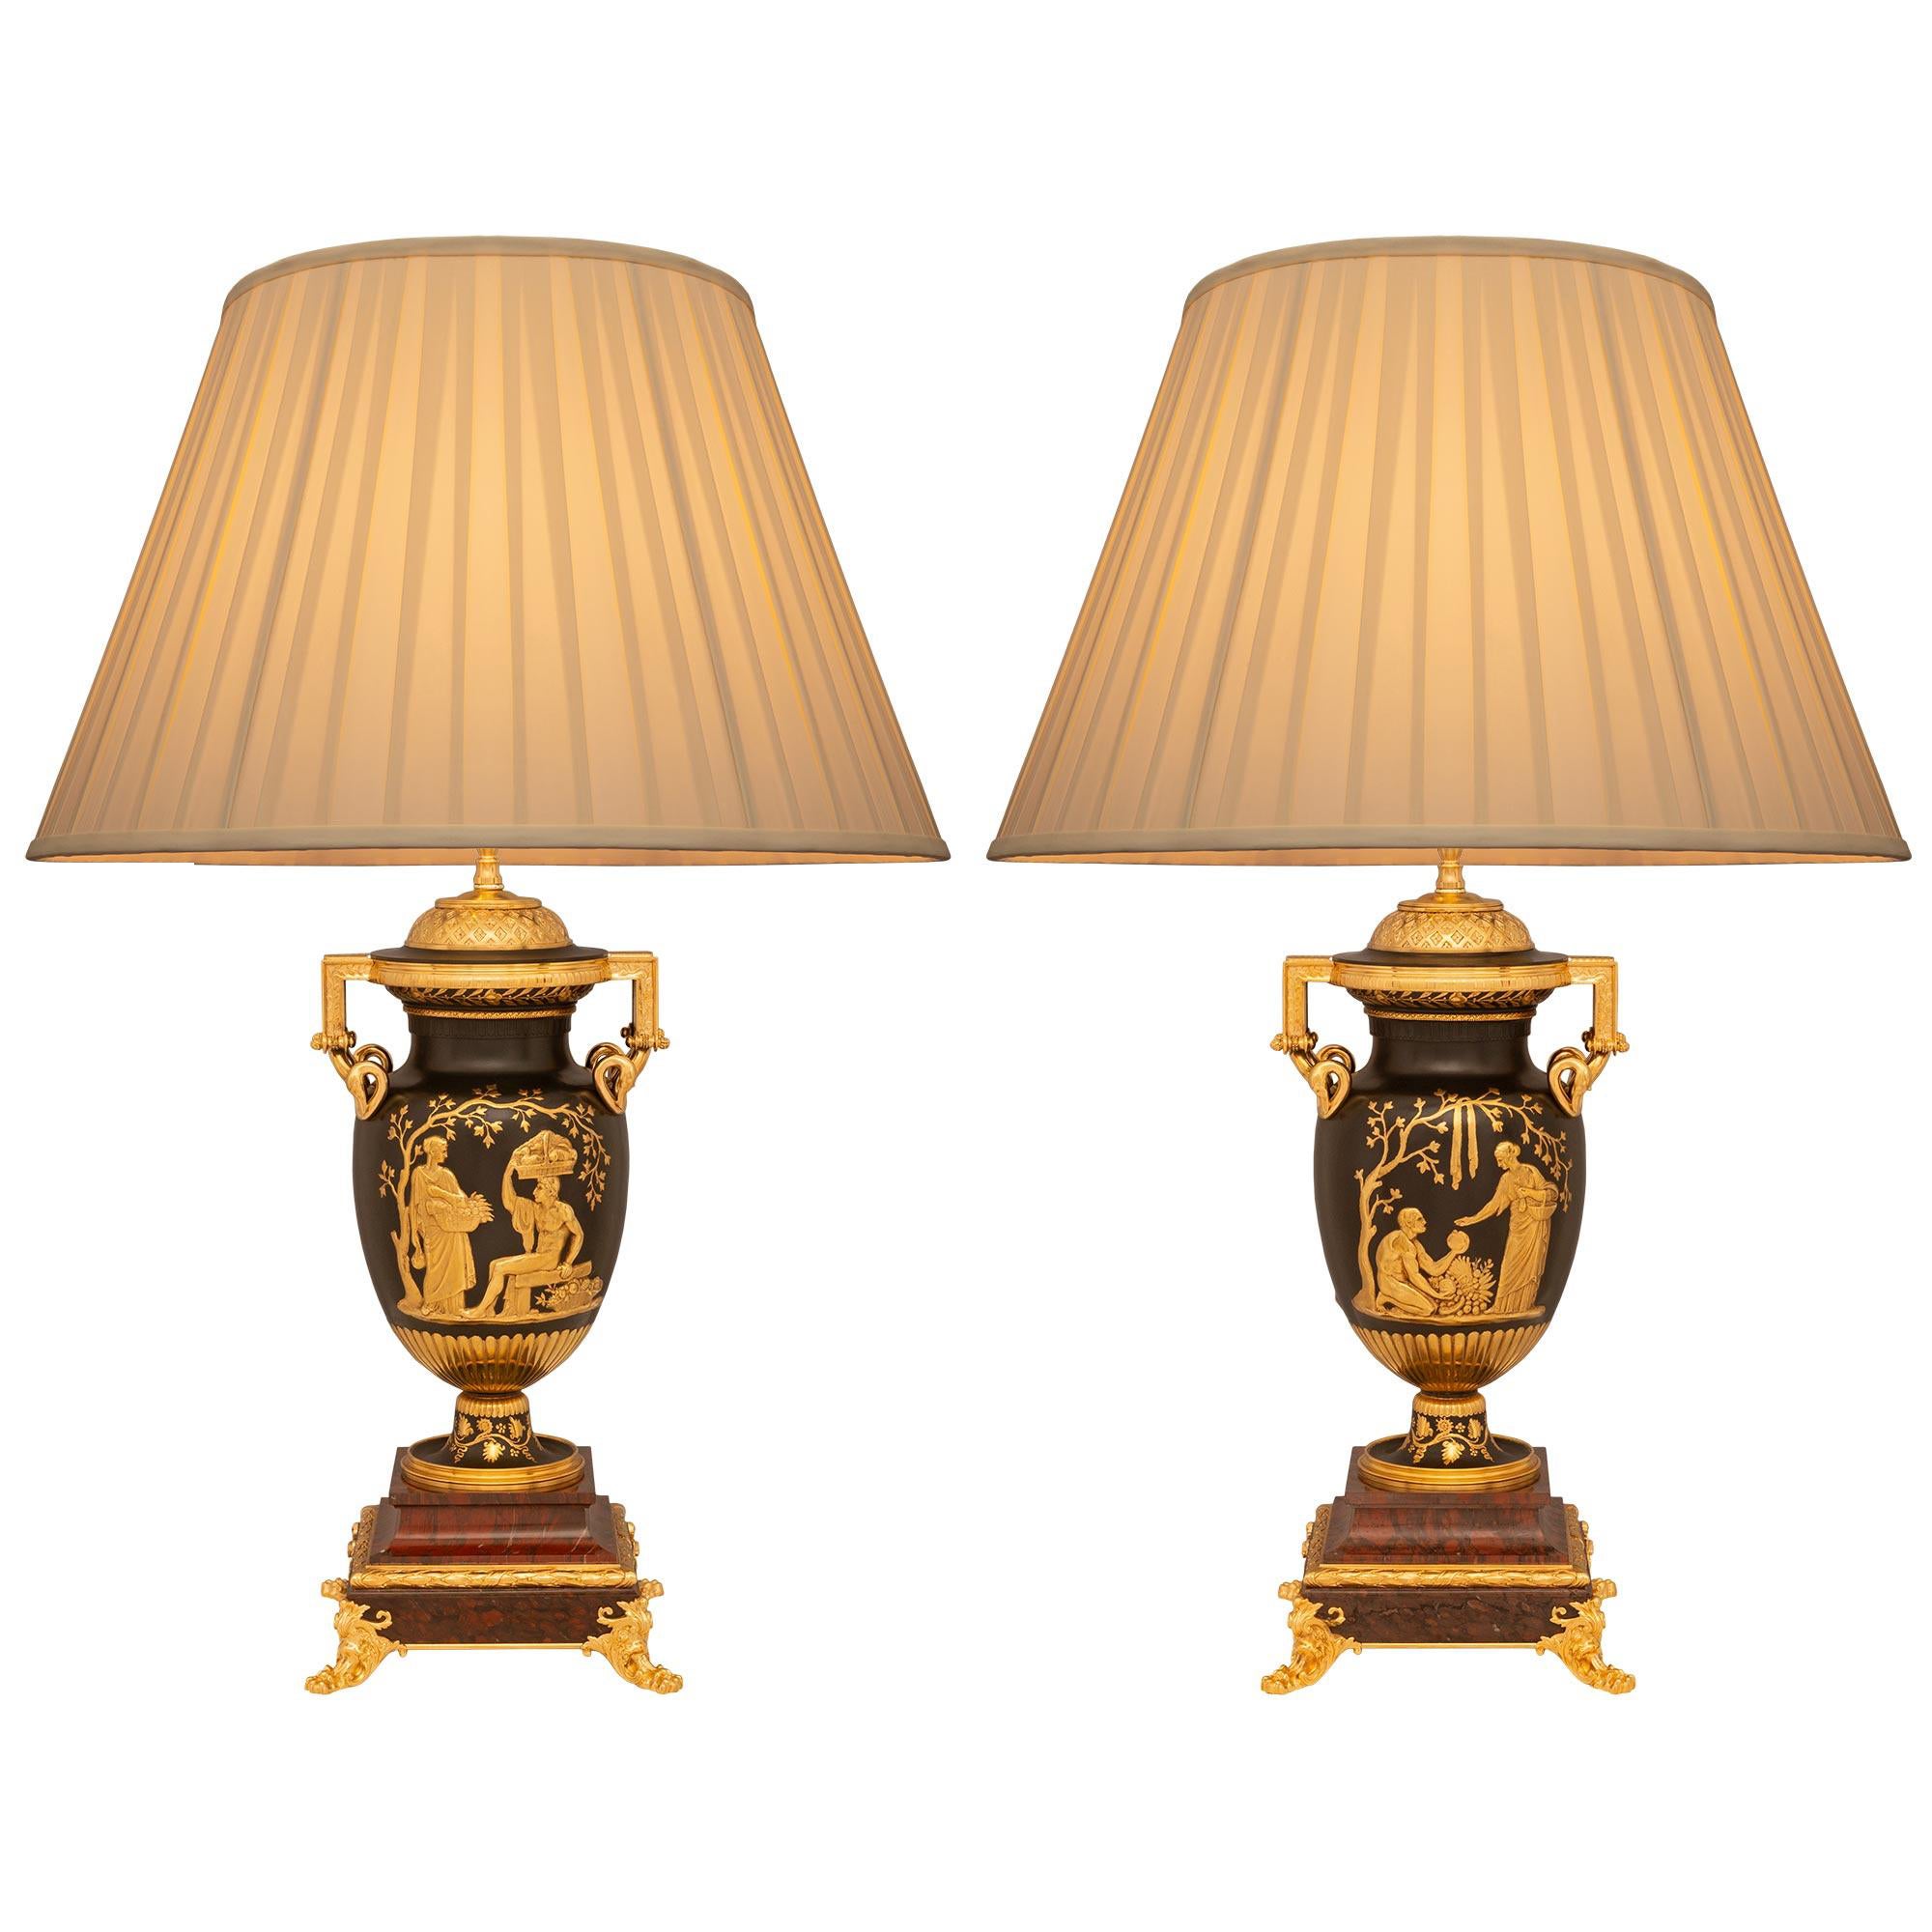 French 19th Century Belle Epoque Period Bronze And Ormolu Lamps For Sale